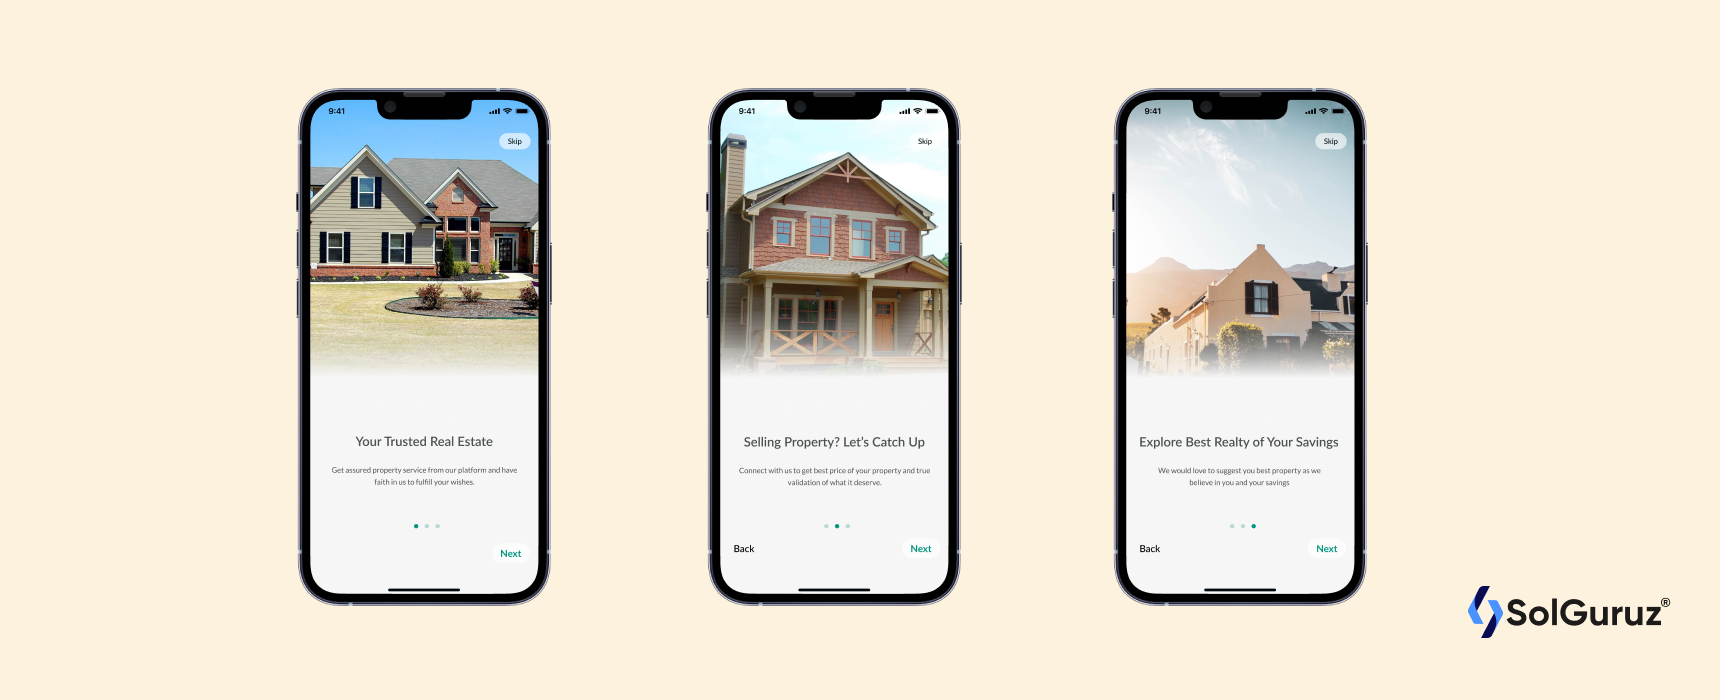 Implementing a User Onboarding to your real estate app